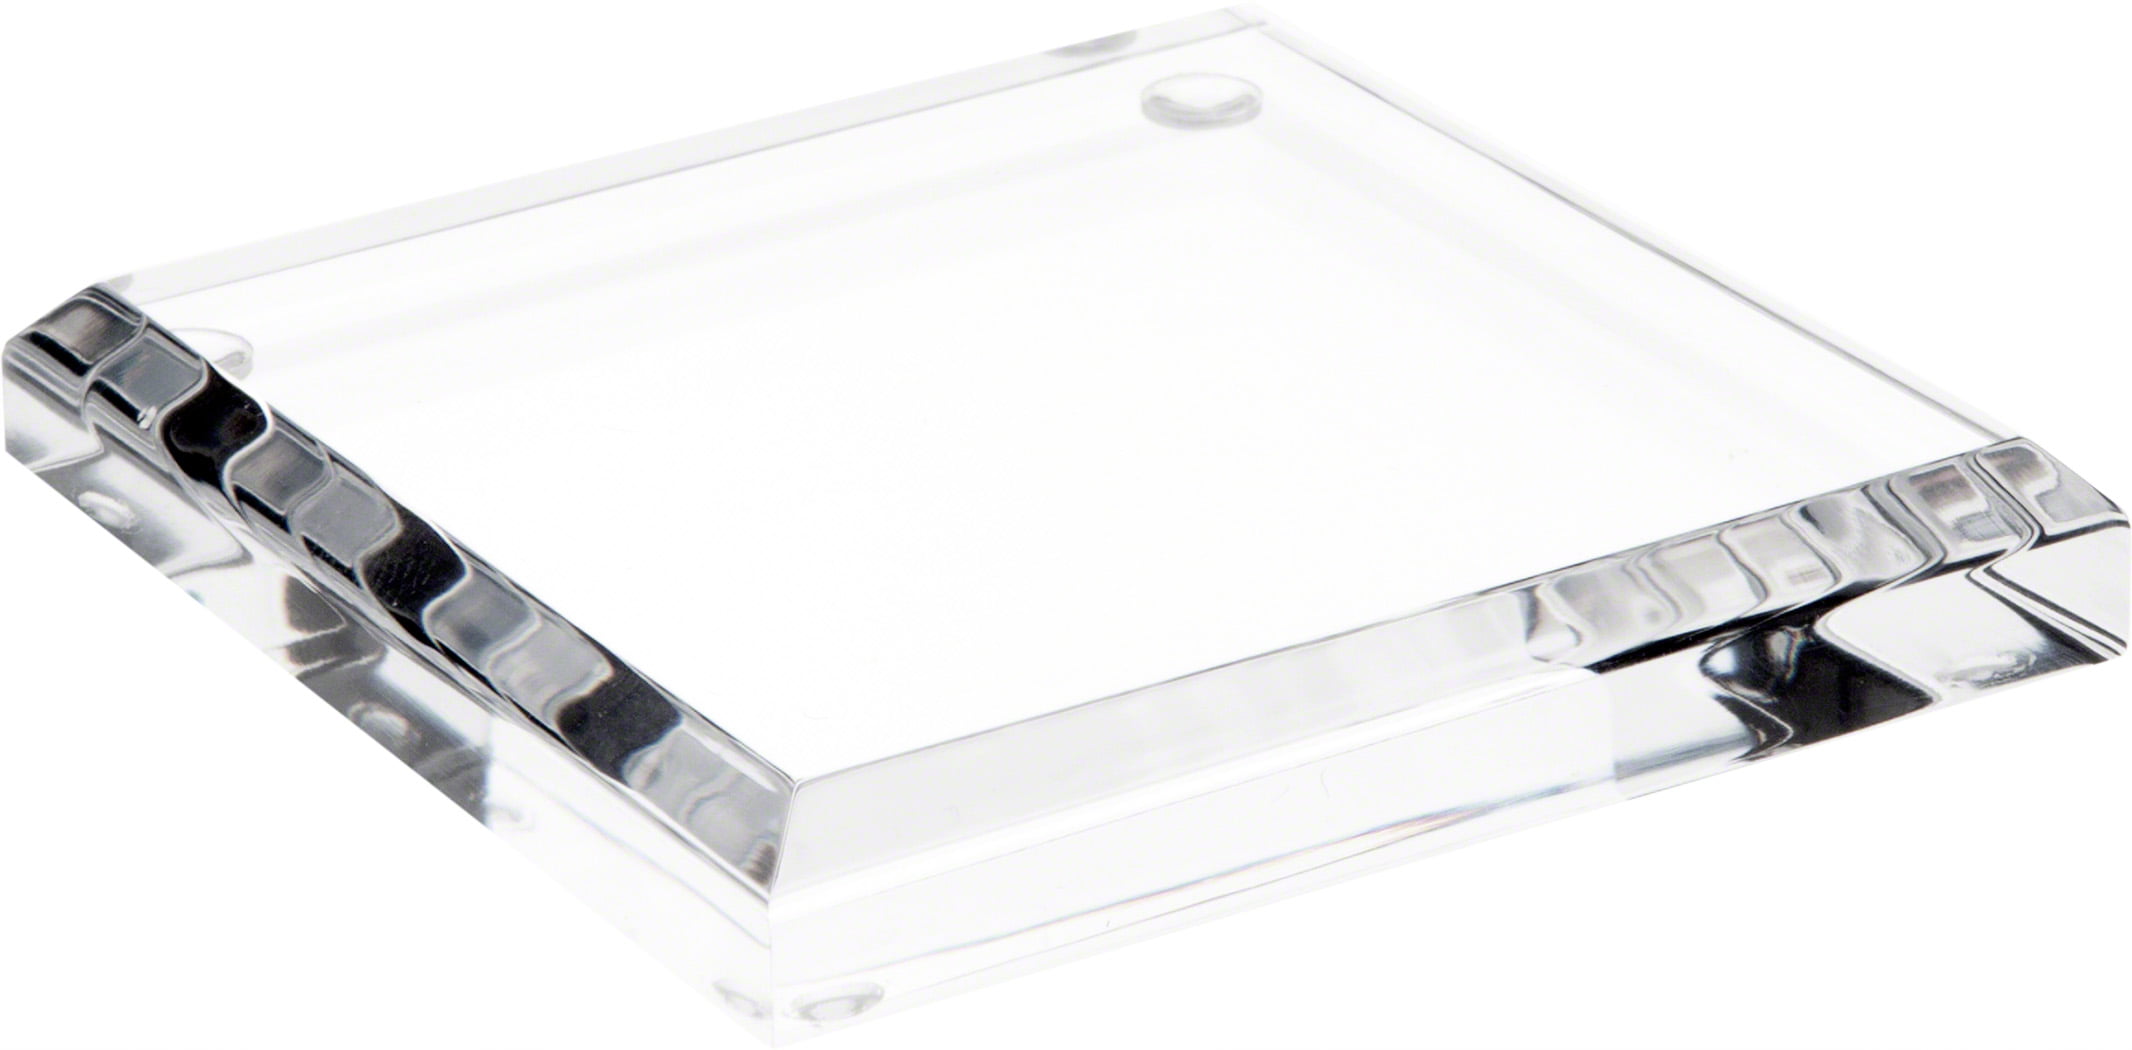 Plymor Clear Acrylic Square Beveled Display Base Pack of 2 3" W x 3" D x 0.5"H 